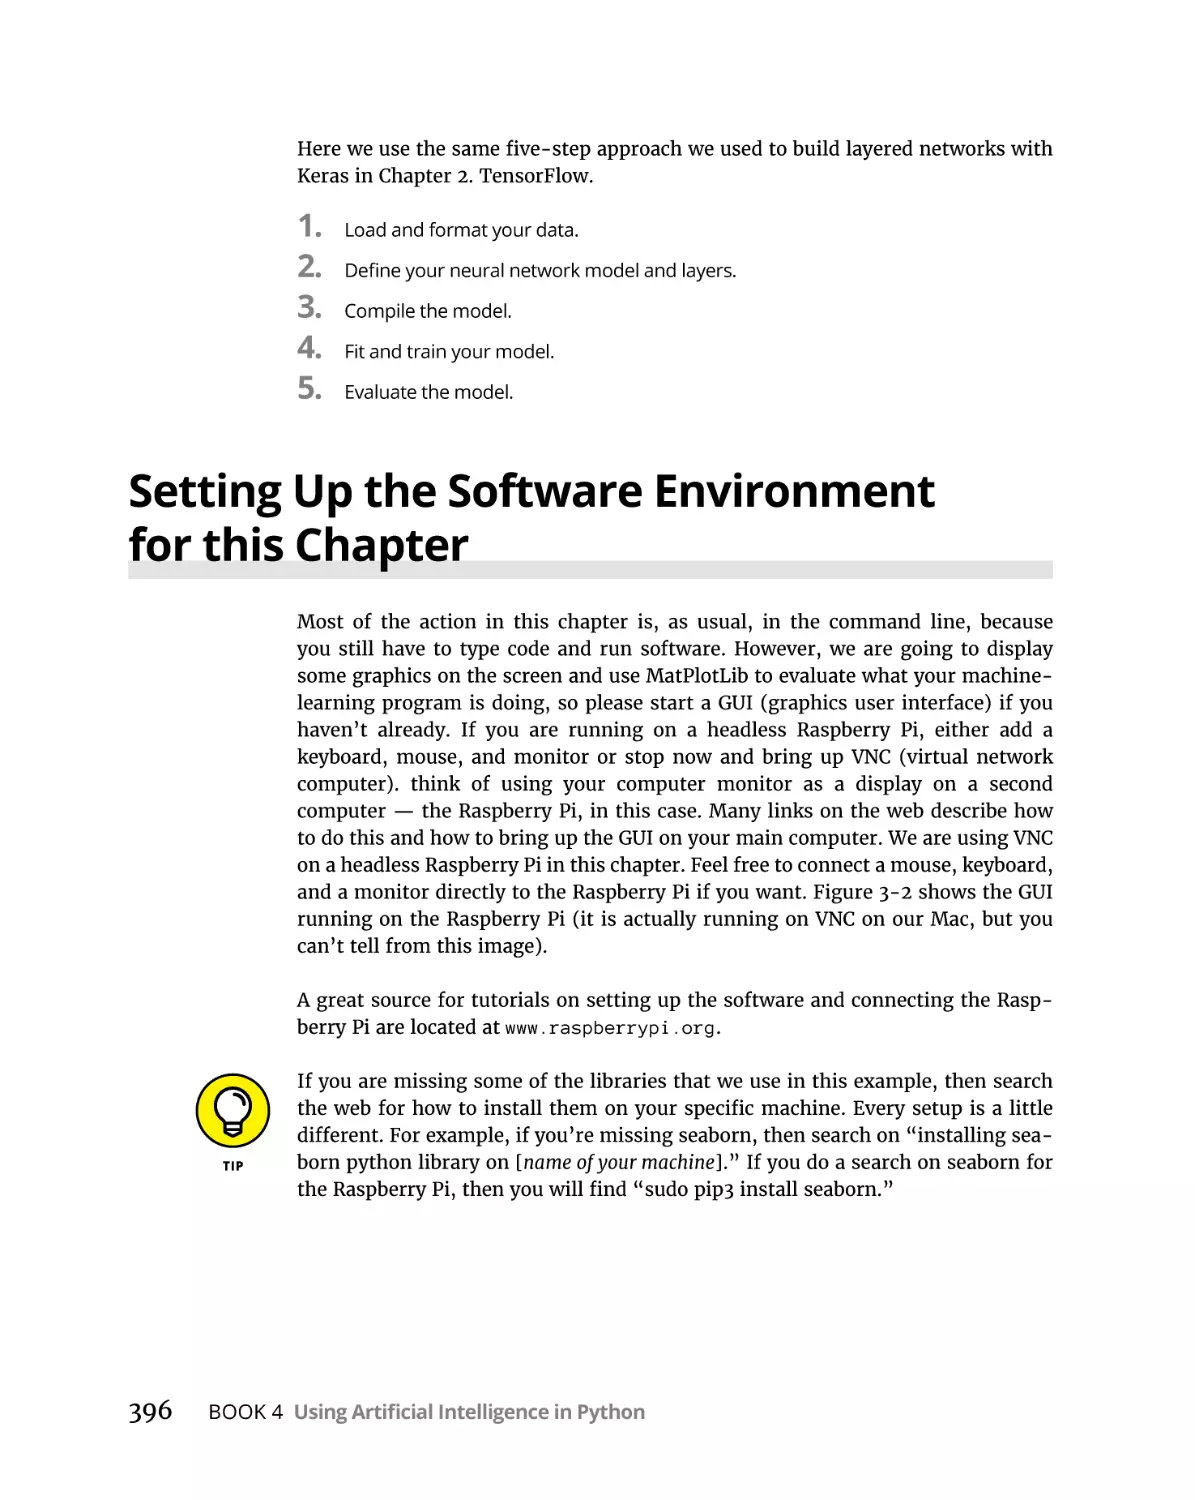 Setting Up the Software Environment for this Chapter